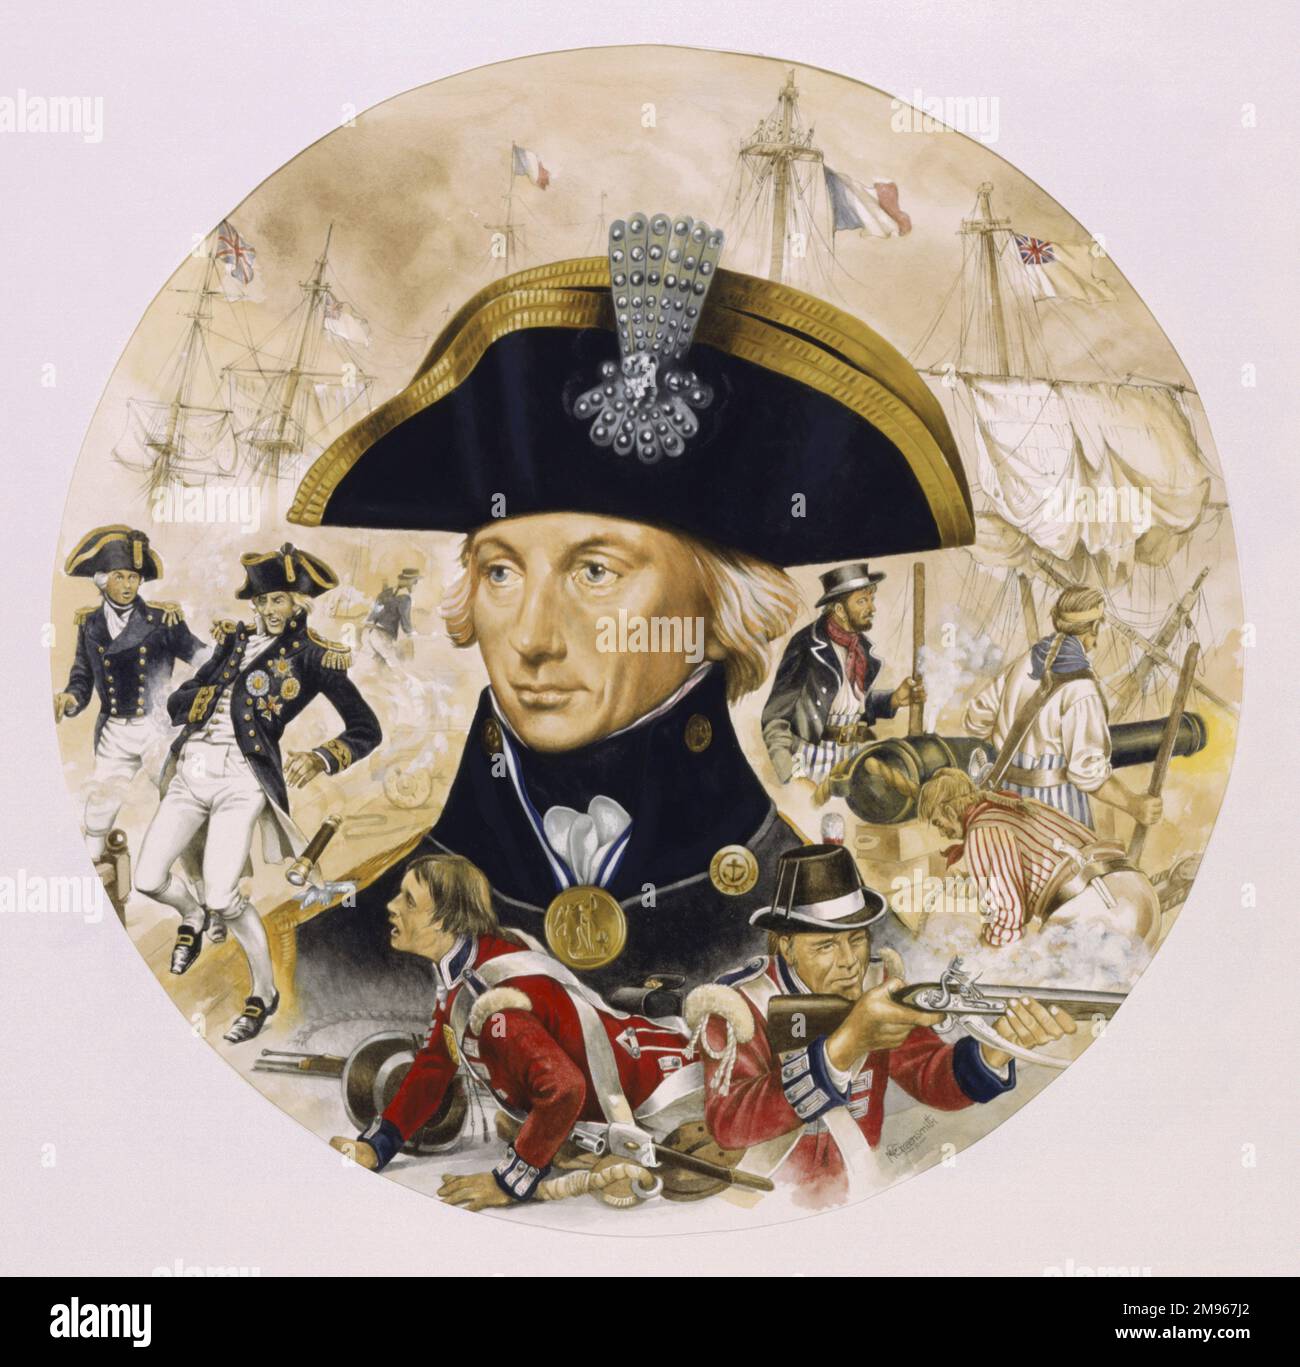 Circular portrait of legendary British naval commander Horatio, Lord Nelson (1758 - 1805) surrounded by scenes depicting his death on the deck of the flagship HMS Victory and fighting during the Battle of Trafalgar. Painting by Malcolm Greensmith Stock Photo